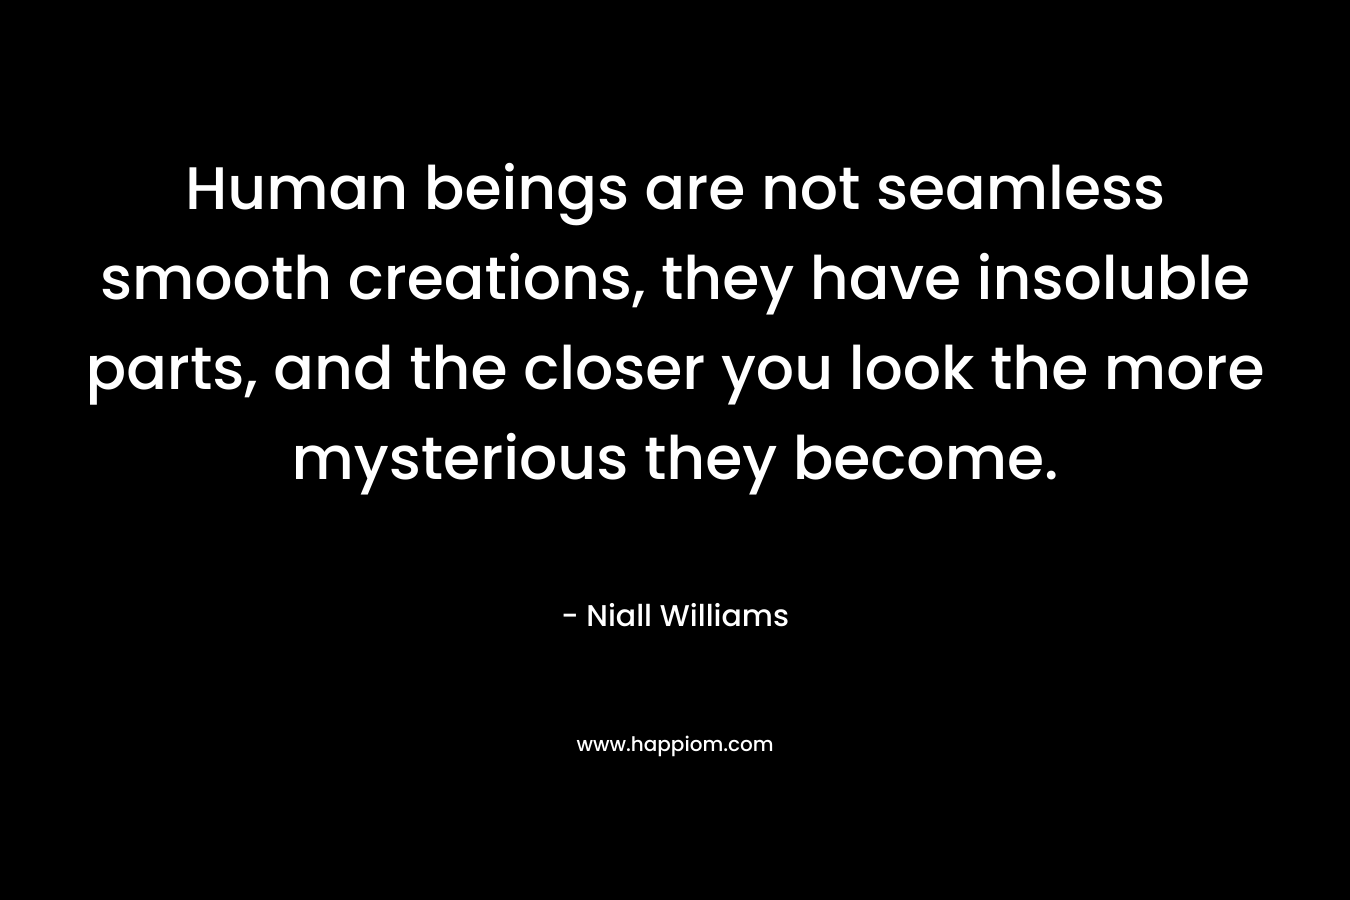 Human beings are not seamless smooth creations, they have insoluble parts, and the closer you look the more mysterious they become. – Niall Williams